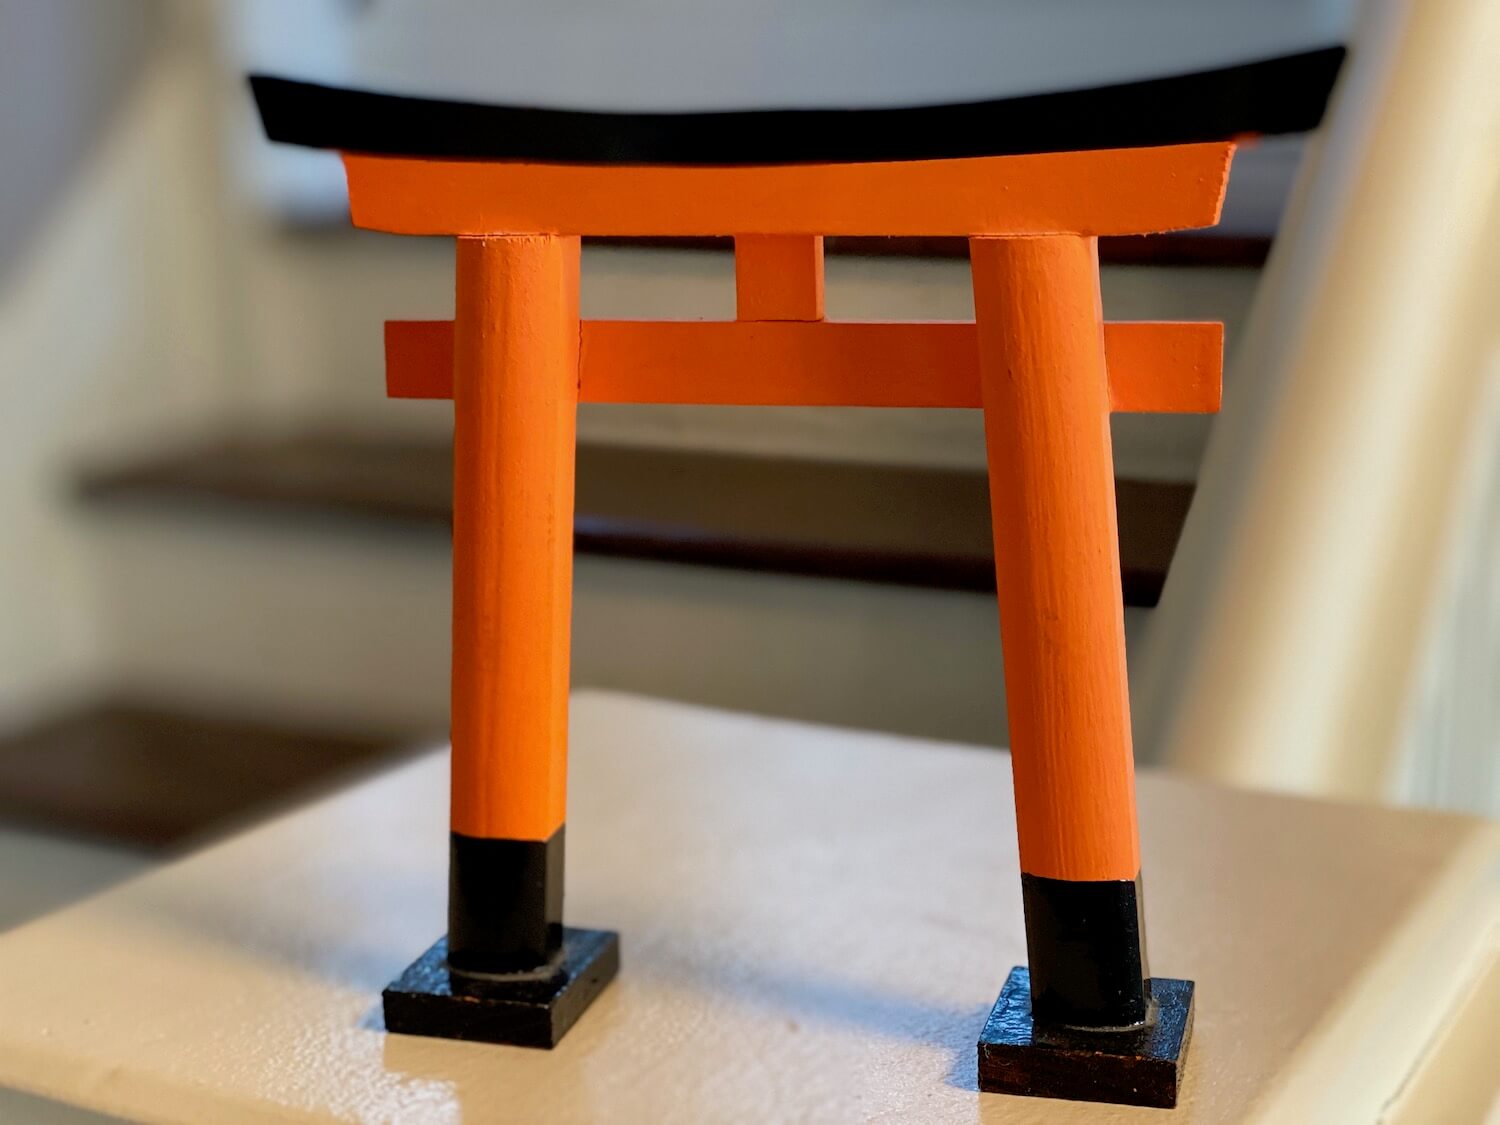 A miniature replica travel souvenir with soul, representing one of the hundreds of gates at the Fushimi Inari Shrine near Kyoto Japan. The gate is made up of two columns, each with a black lacquered base leading up to a orangish red pergola connecting the two. The Japanese style cap of the pergola is also black lacquer.